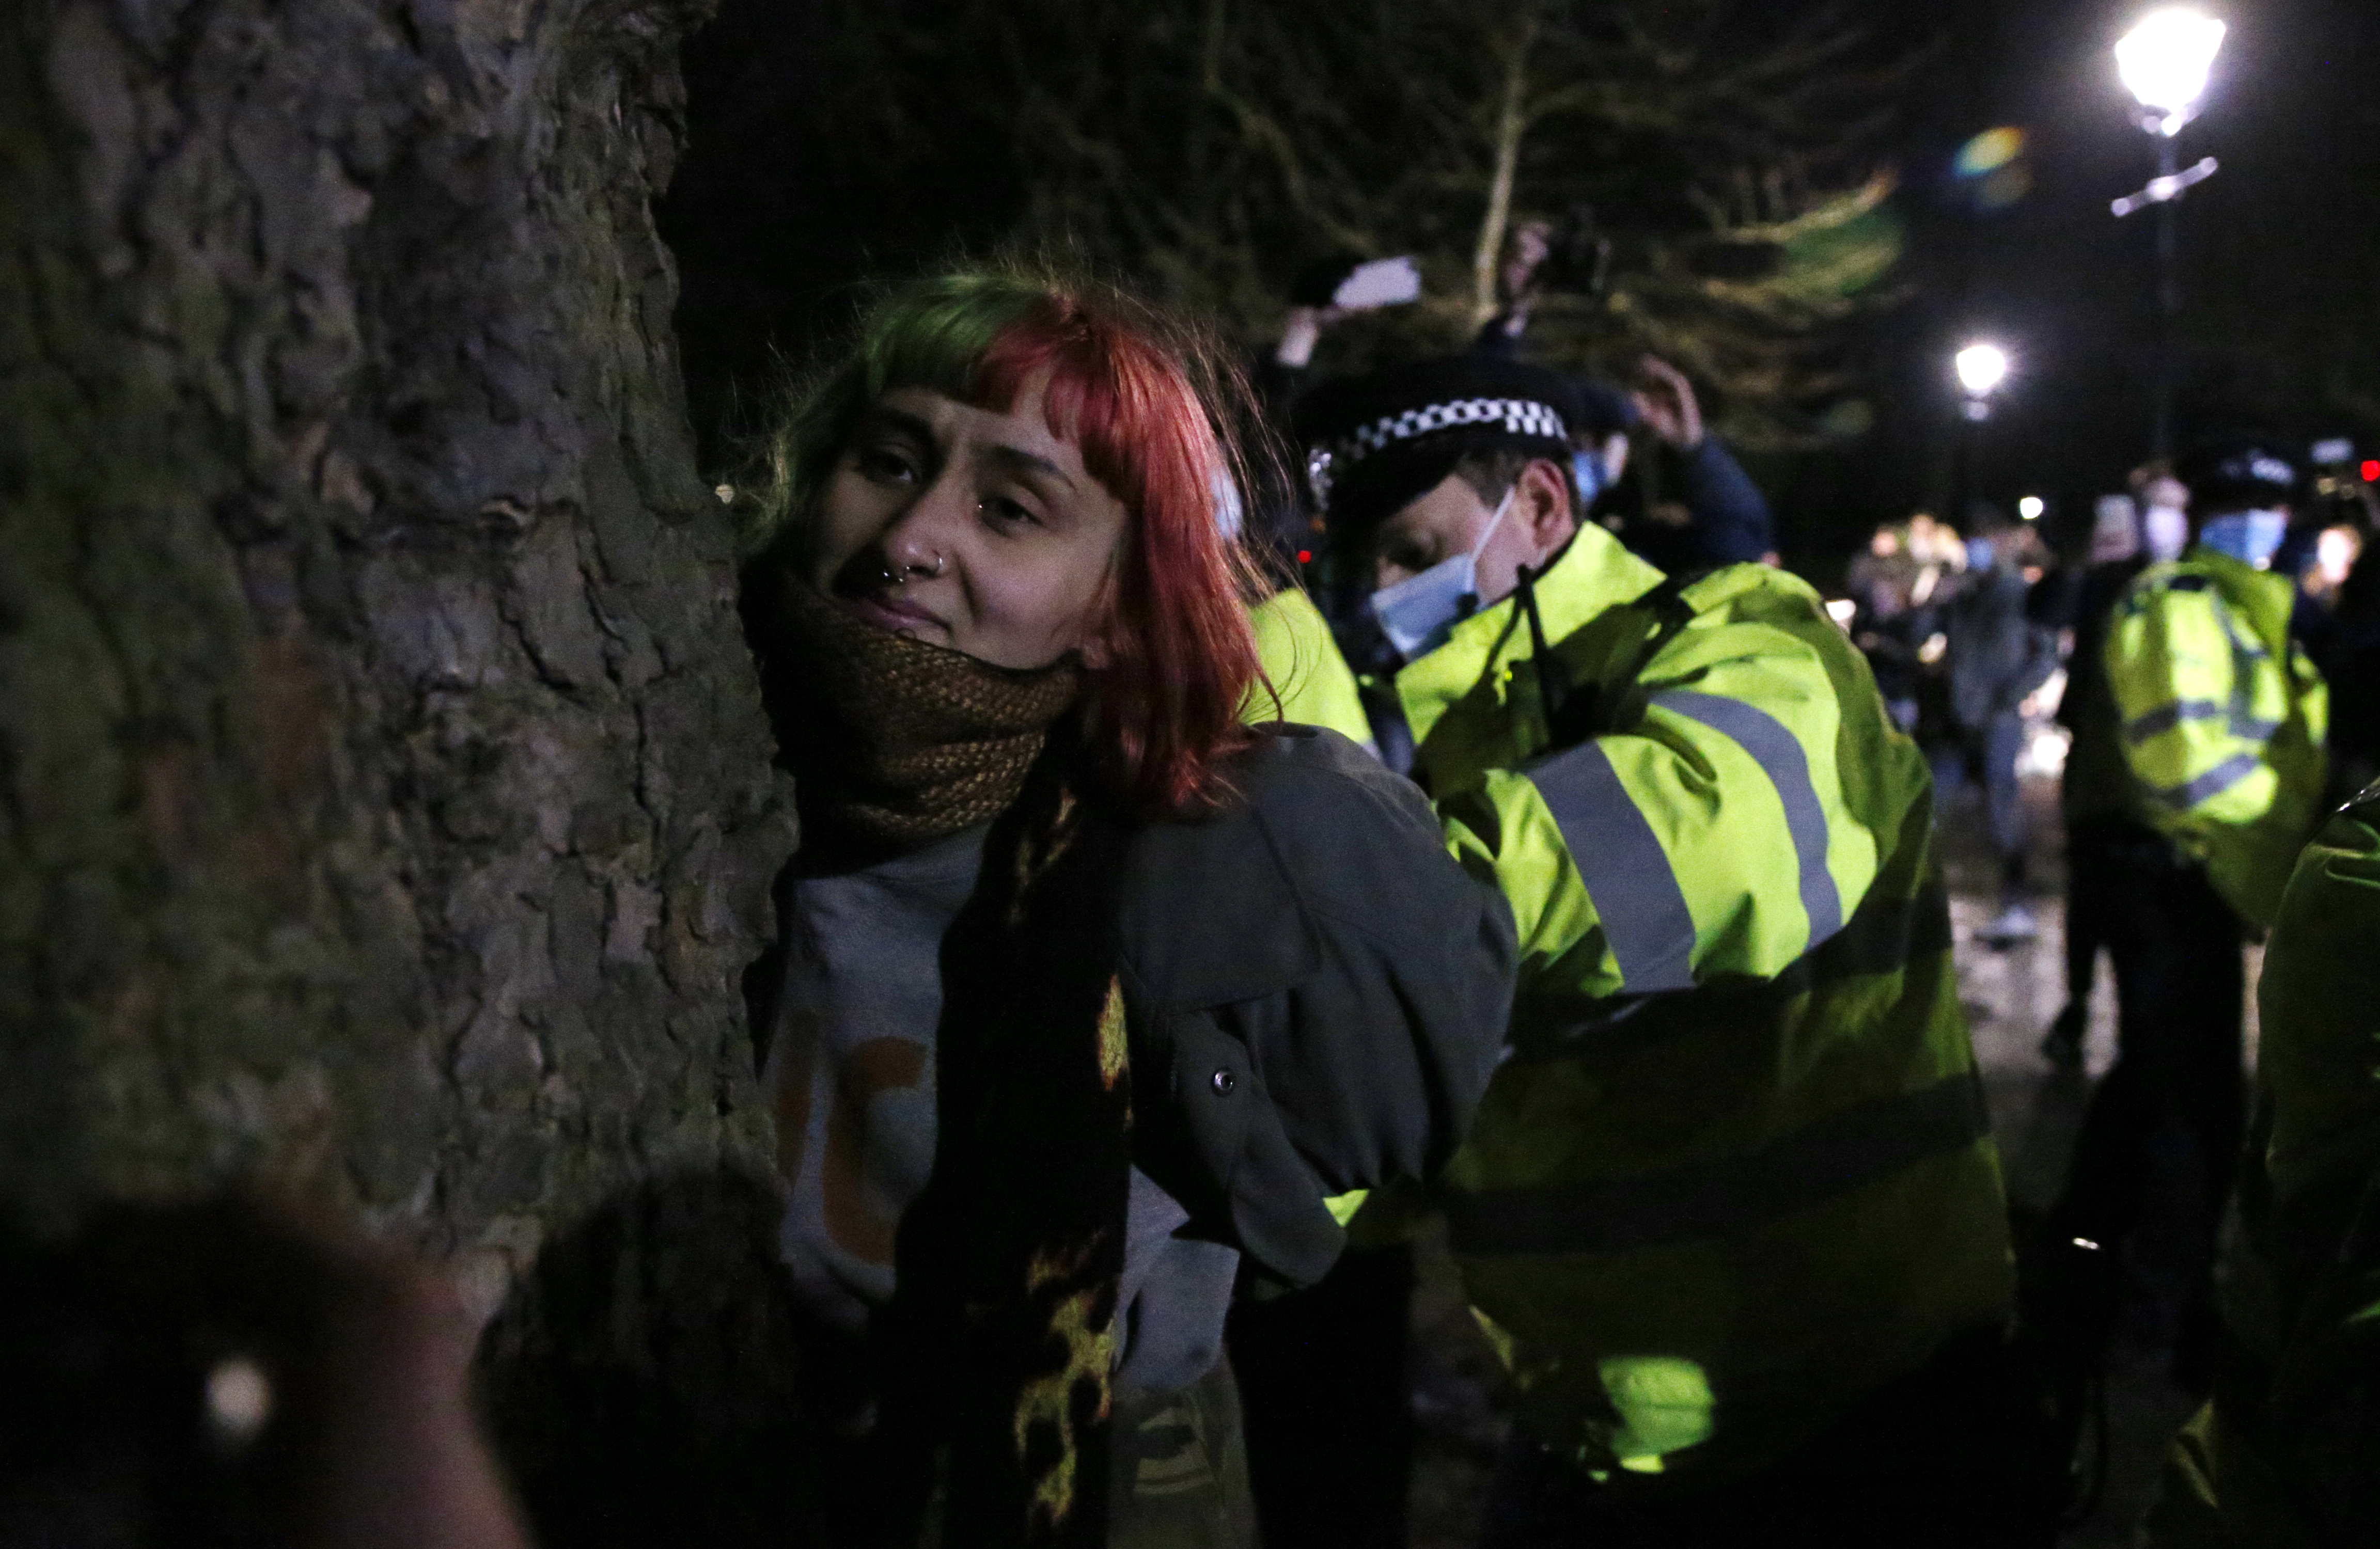 A woman is arrested during a vigil for Sarah Everard on Clapham Common photo.